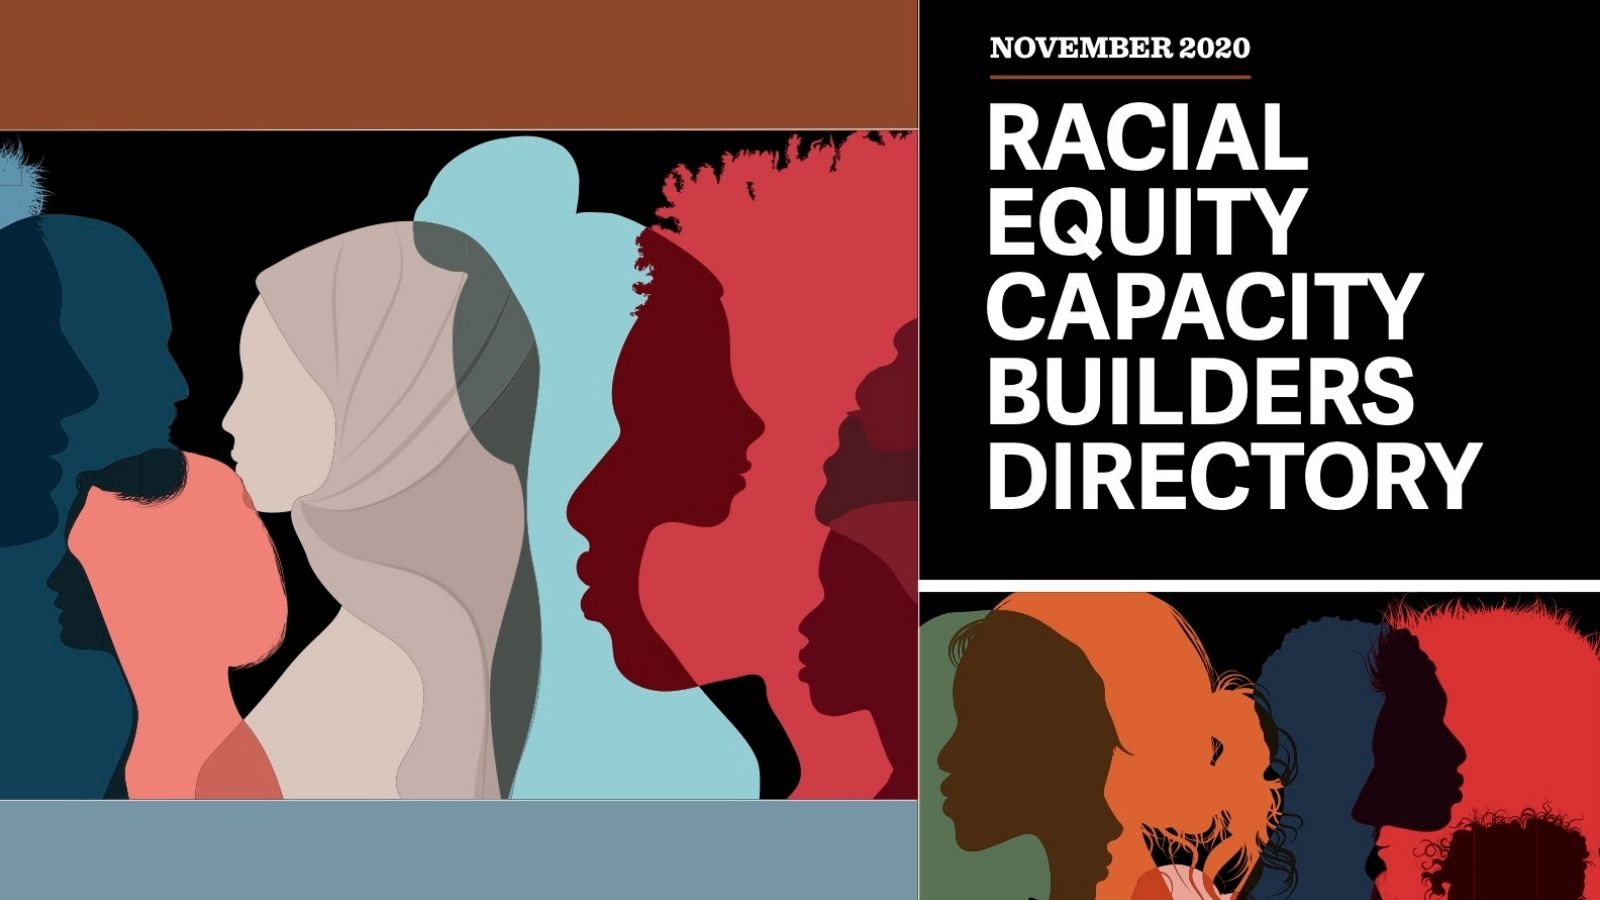 Cover of the Racial Equity Capacity Builders Directory; a collage of different colored silhouettes of people. A black box in the upper right corner has white text in it that says "Racial Equity Capacity Builders Directory."